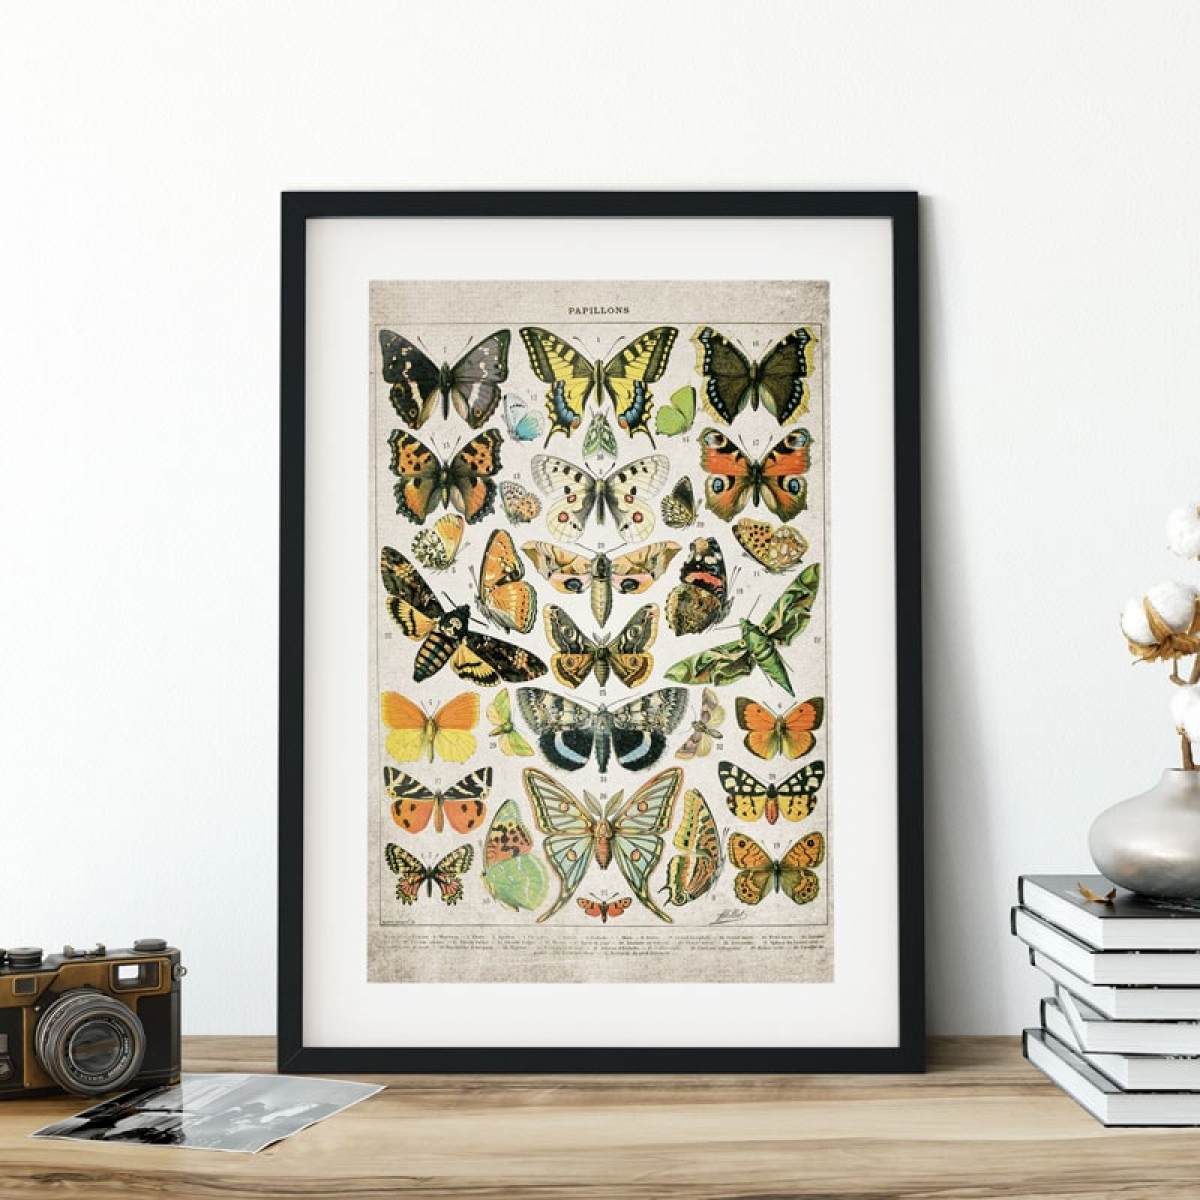 Minibeast Vintage Entomology Giclee Print (Butterflies and Moths Plate From 1907)